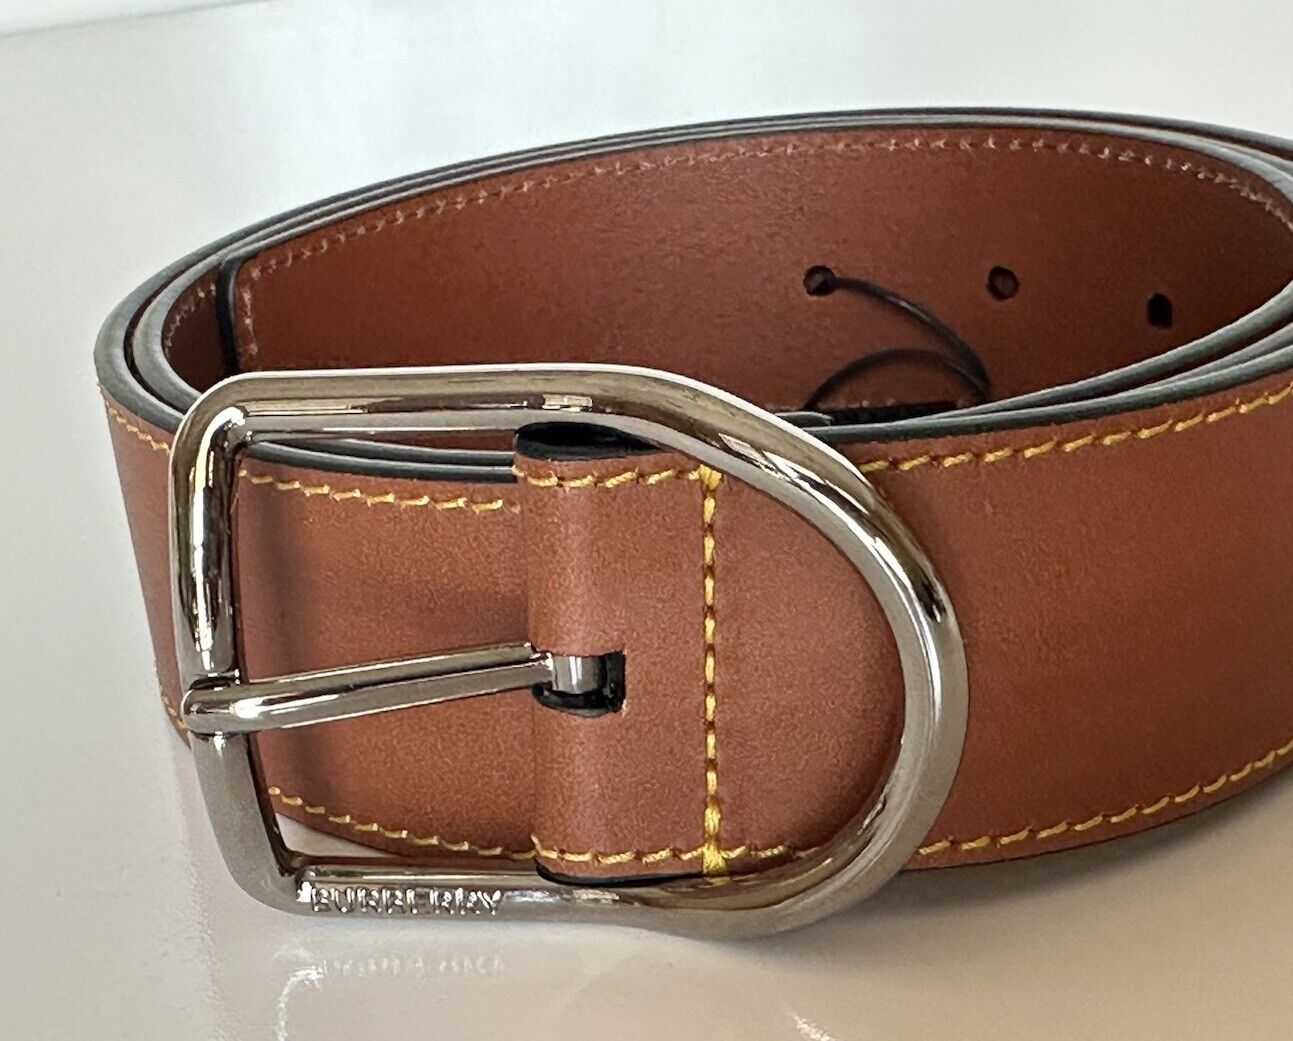 Burberry Curved Silver Buckle Leather Wide Tan Belt 40/100 8016023 IT New $360